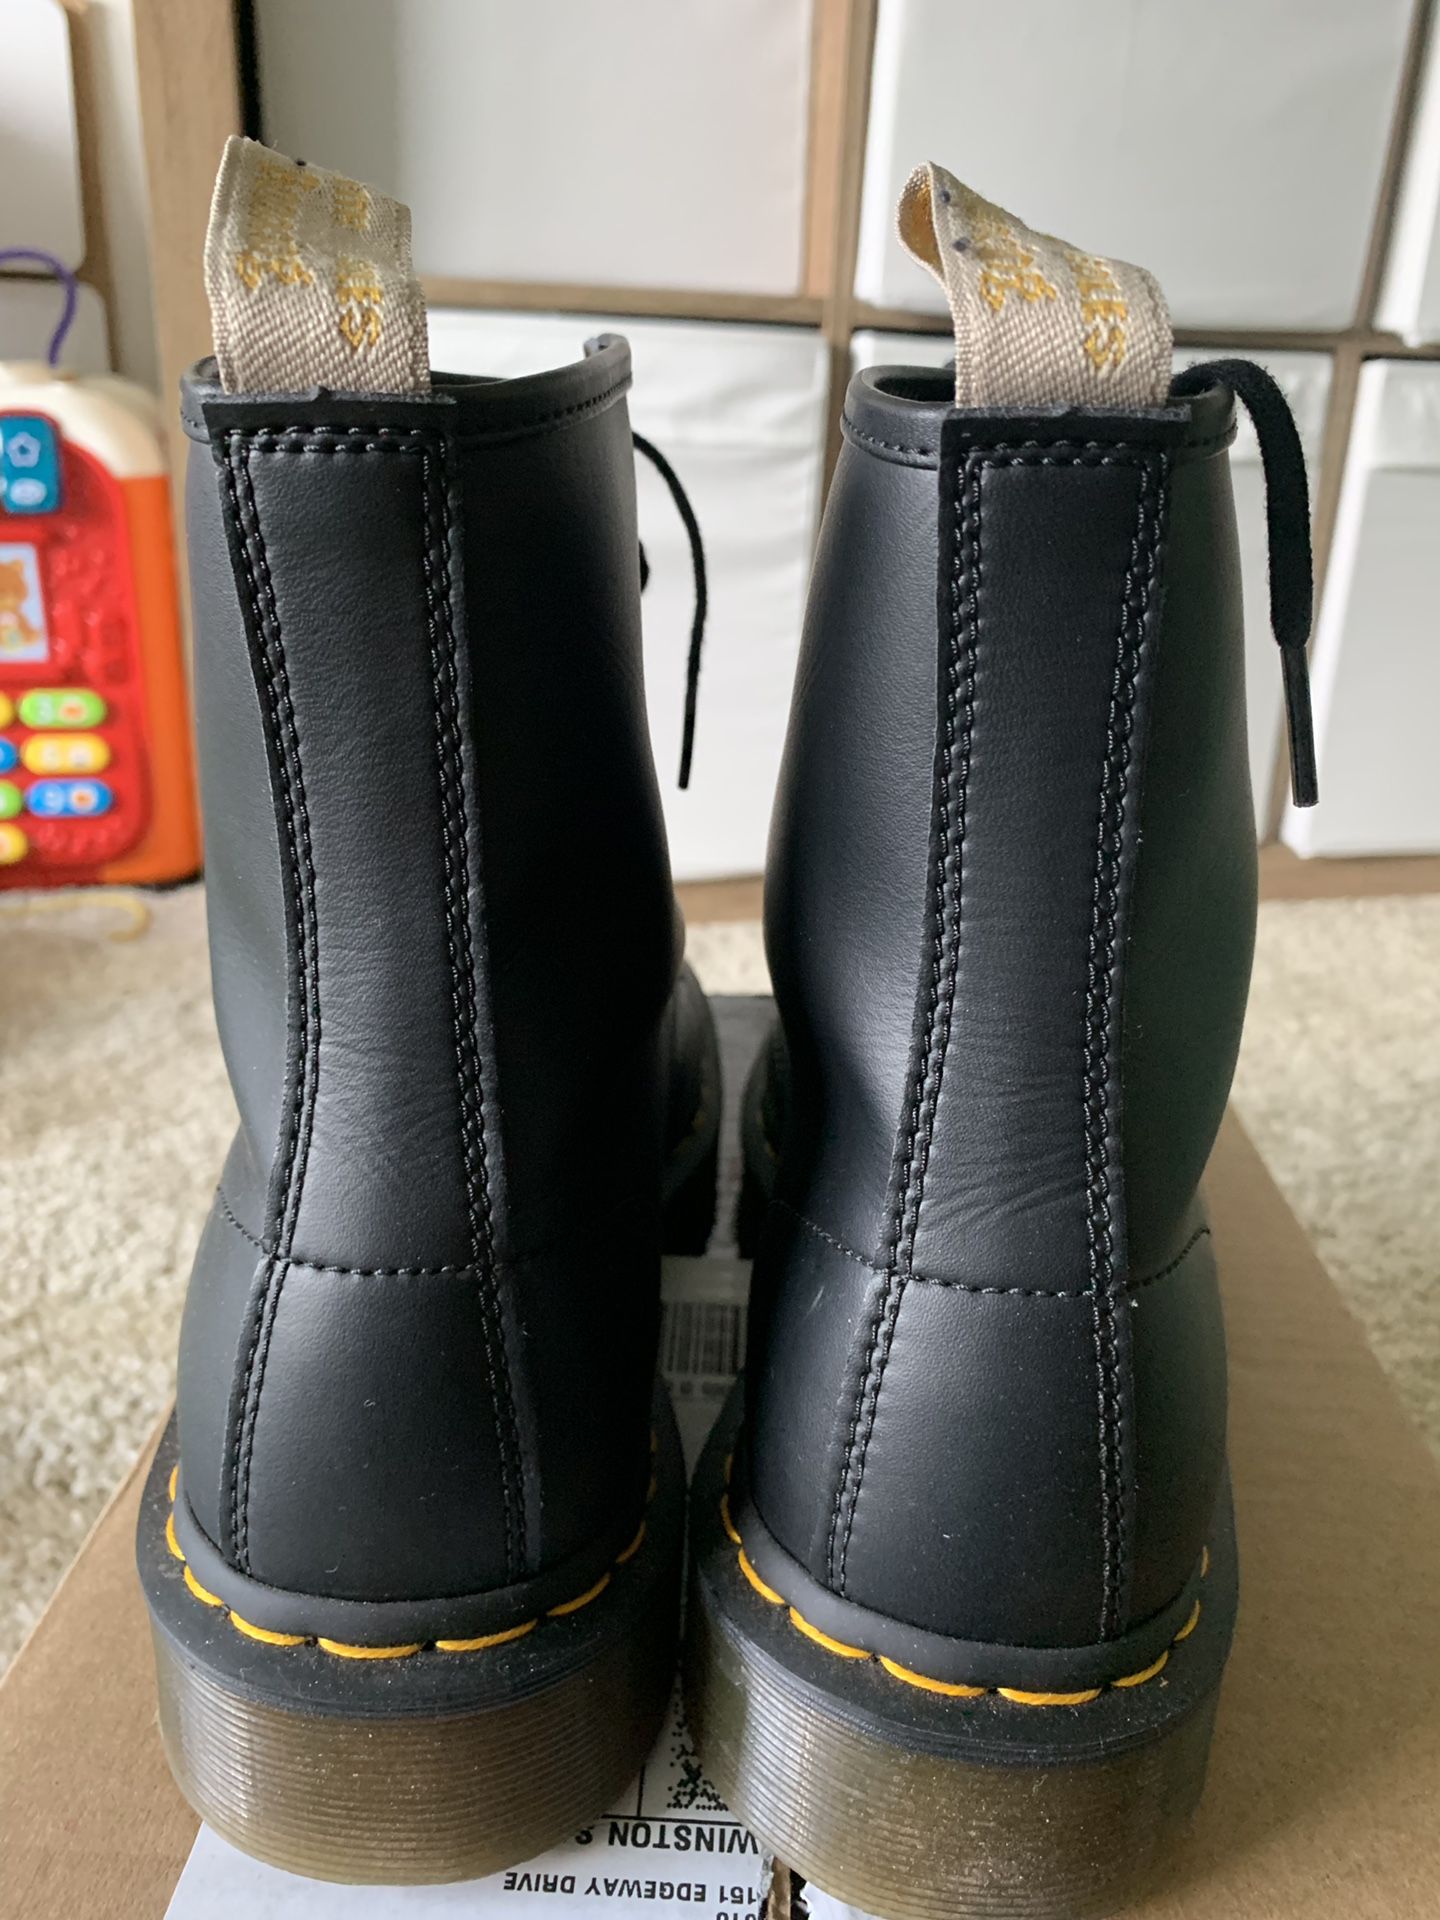 Doc Marten Boots sz 11 for Sale in Chino Hills, CA - OfferUp